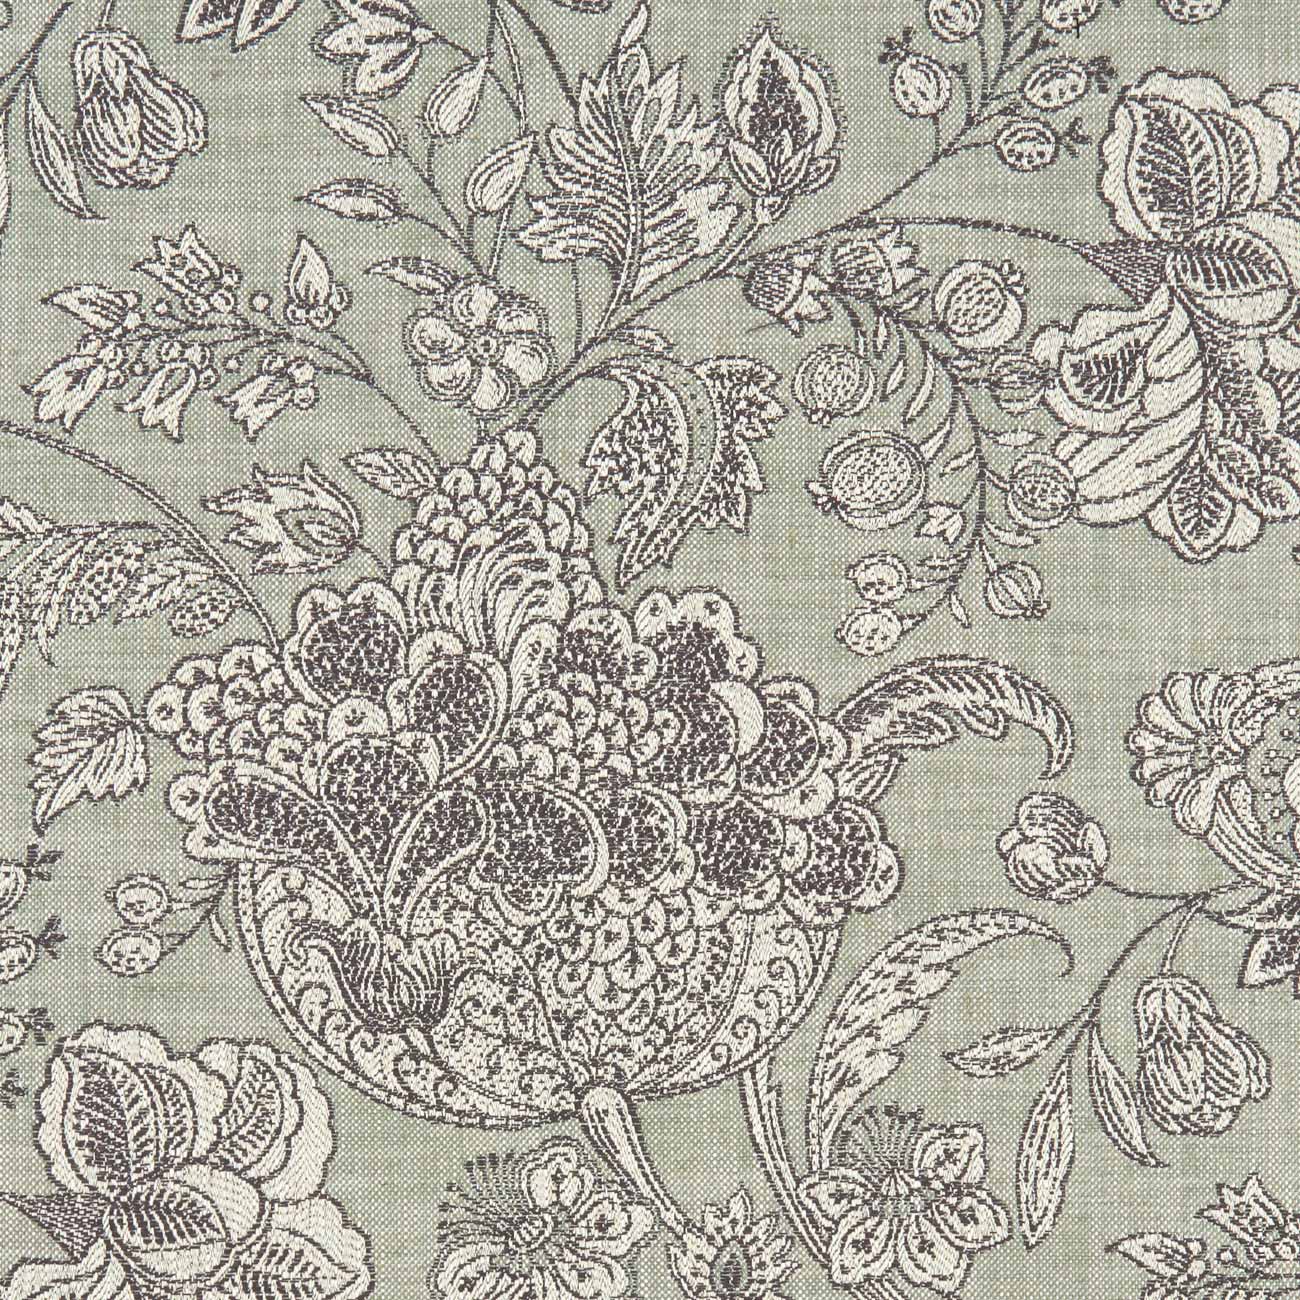 Heritage collection. Axis ткани. Textile Heritage collection схема.